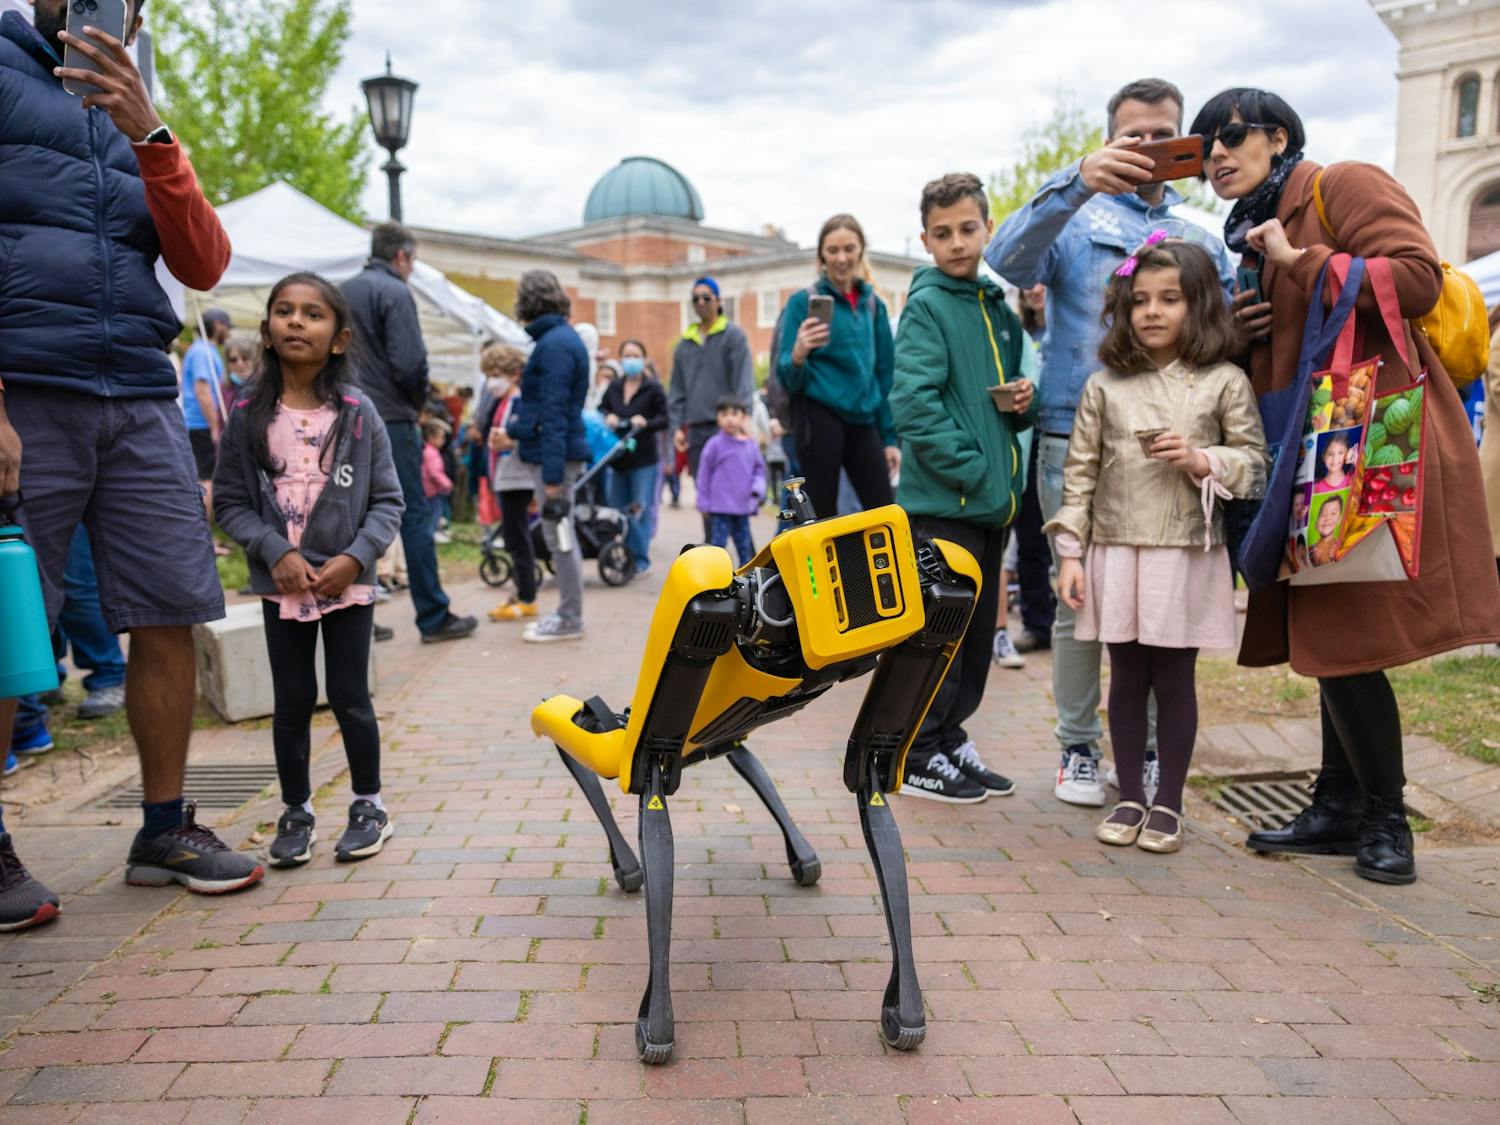 Spot, an agile mobile robot from Boston Dynamics, wows the crowd at Morehead Planetarium and Science Center as part of UNC Science Expo on Saturday, April 9, 2022.
Photo Courtesy of Andrew Russell UNC Research.